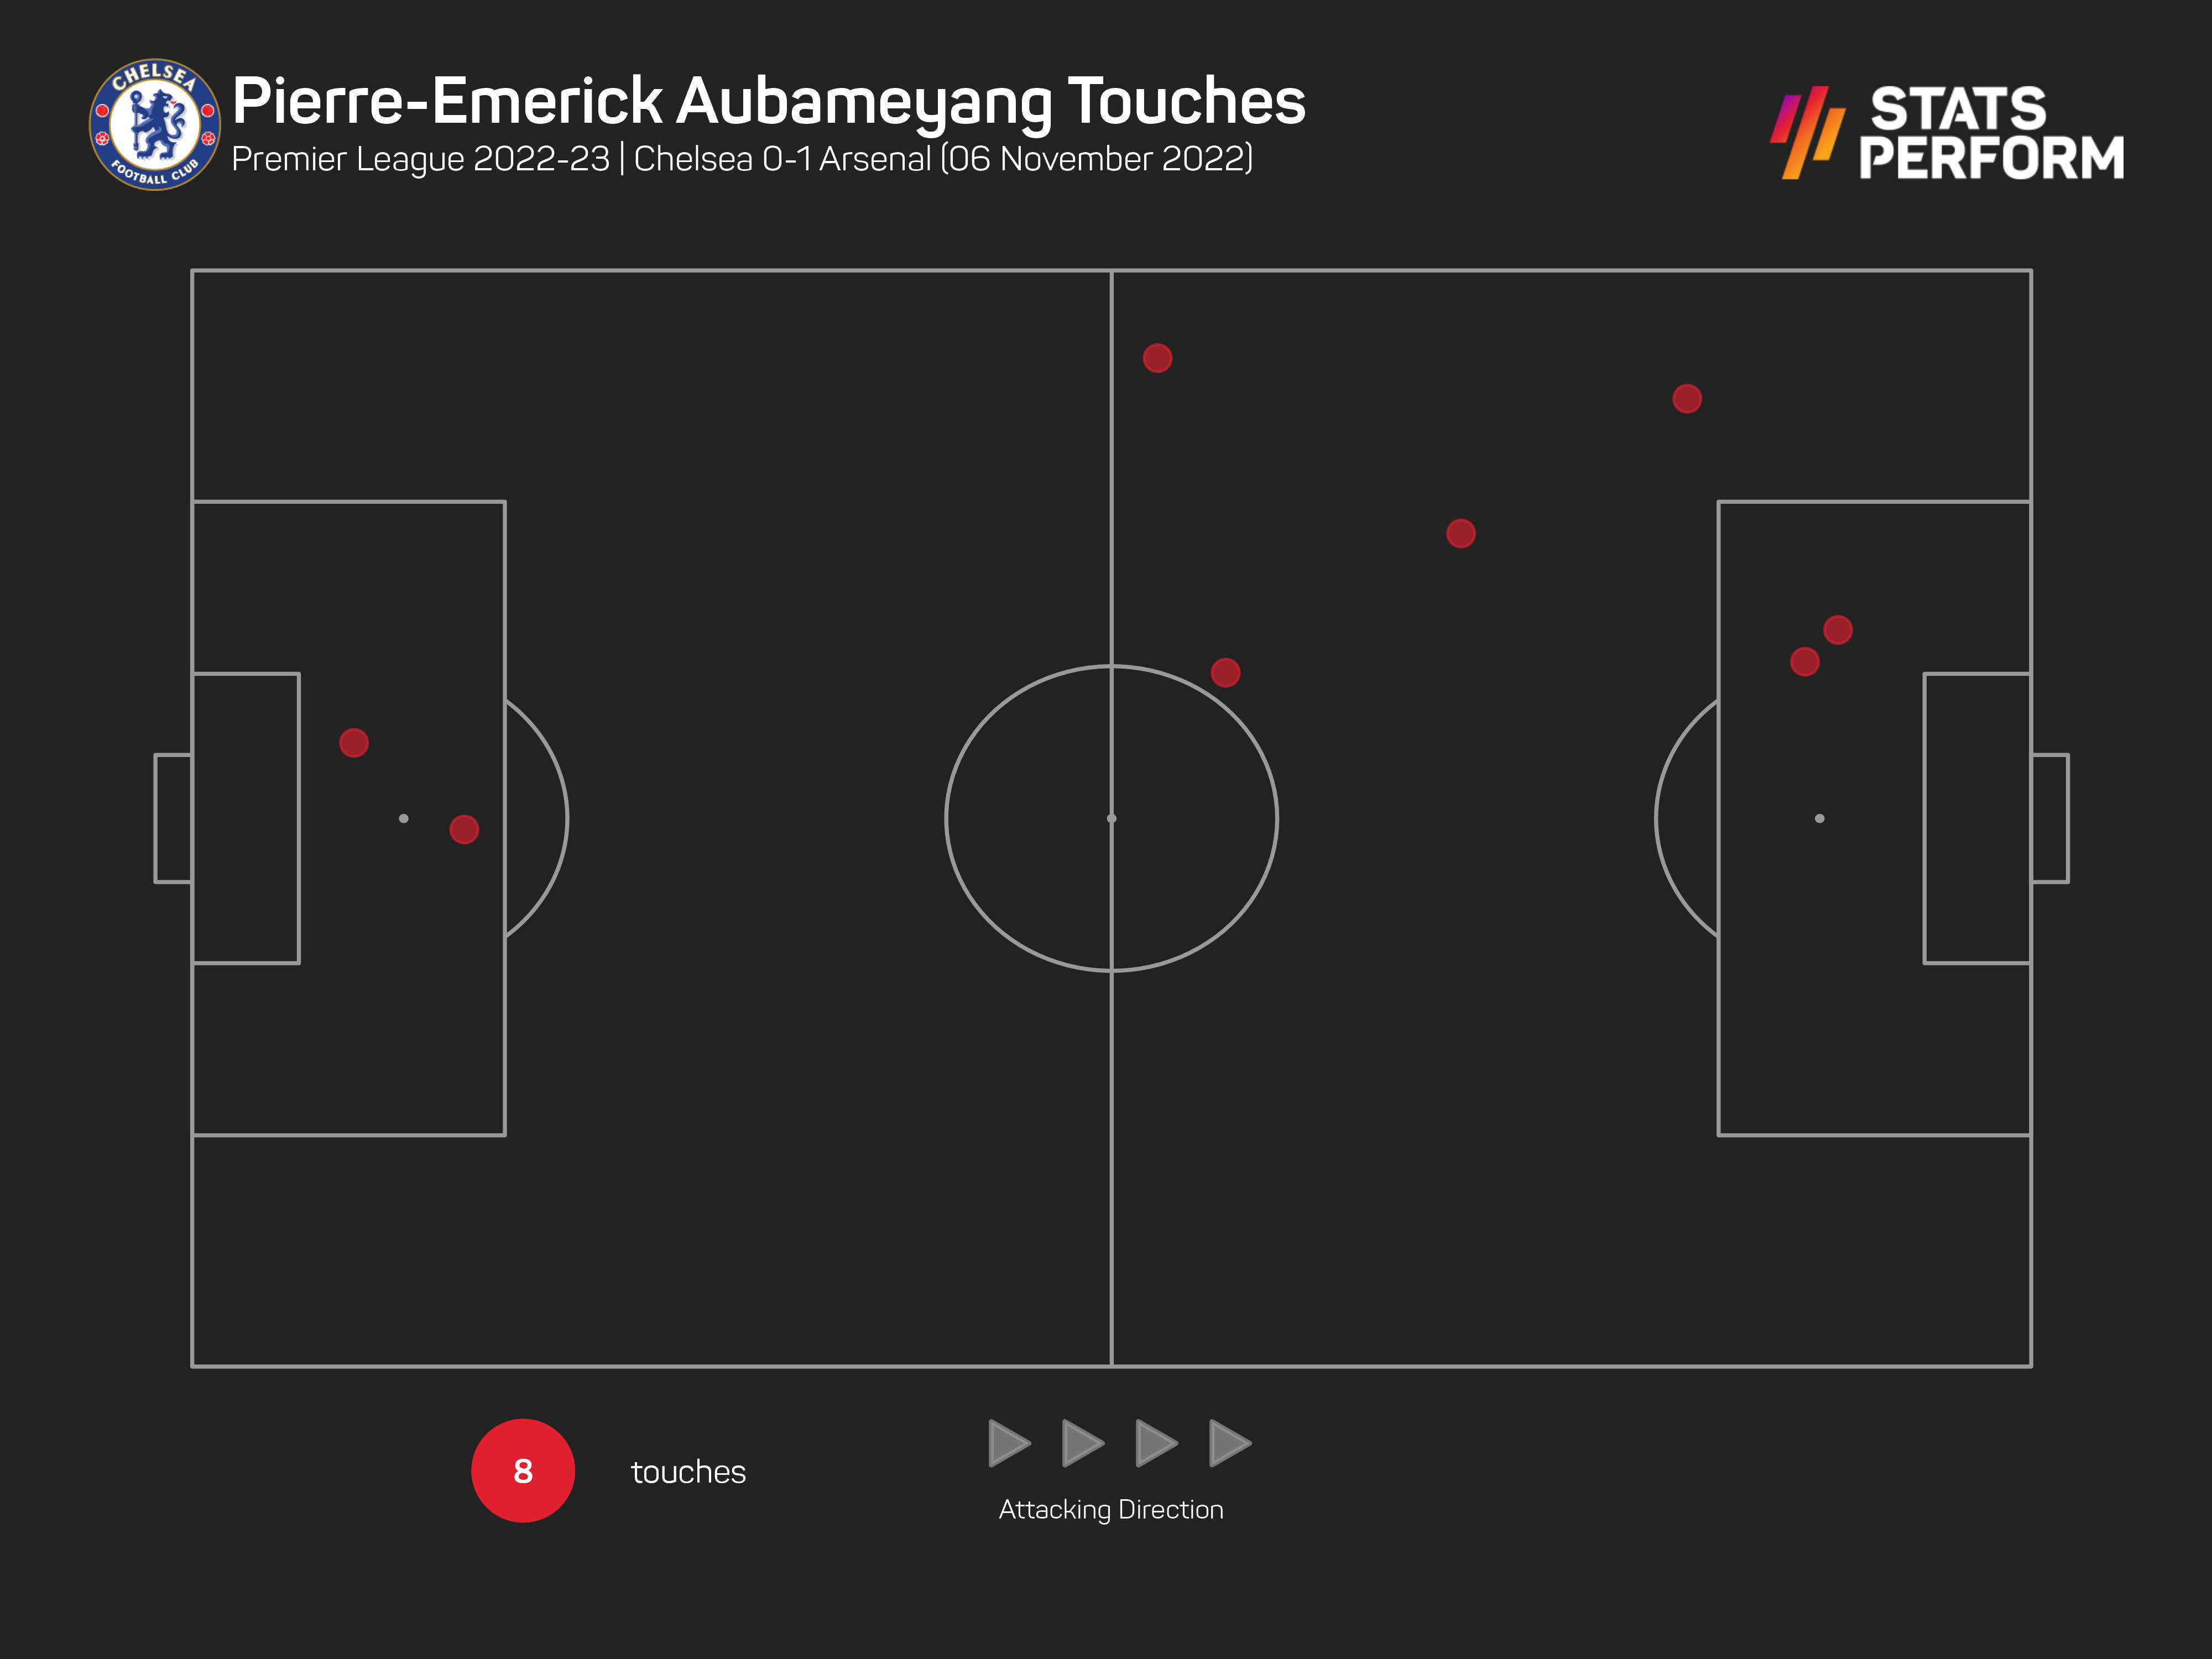 Pierre-Emerick Aubameyang struggled to get in the game